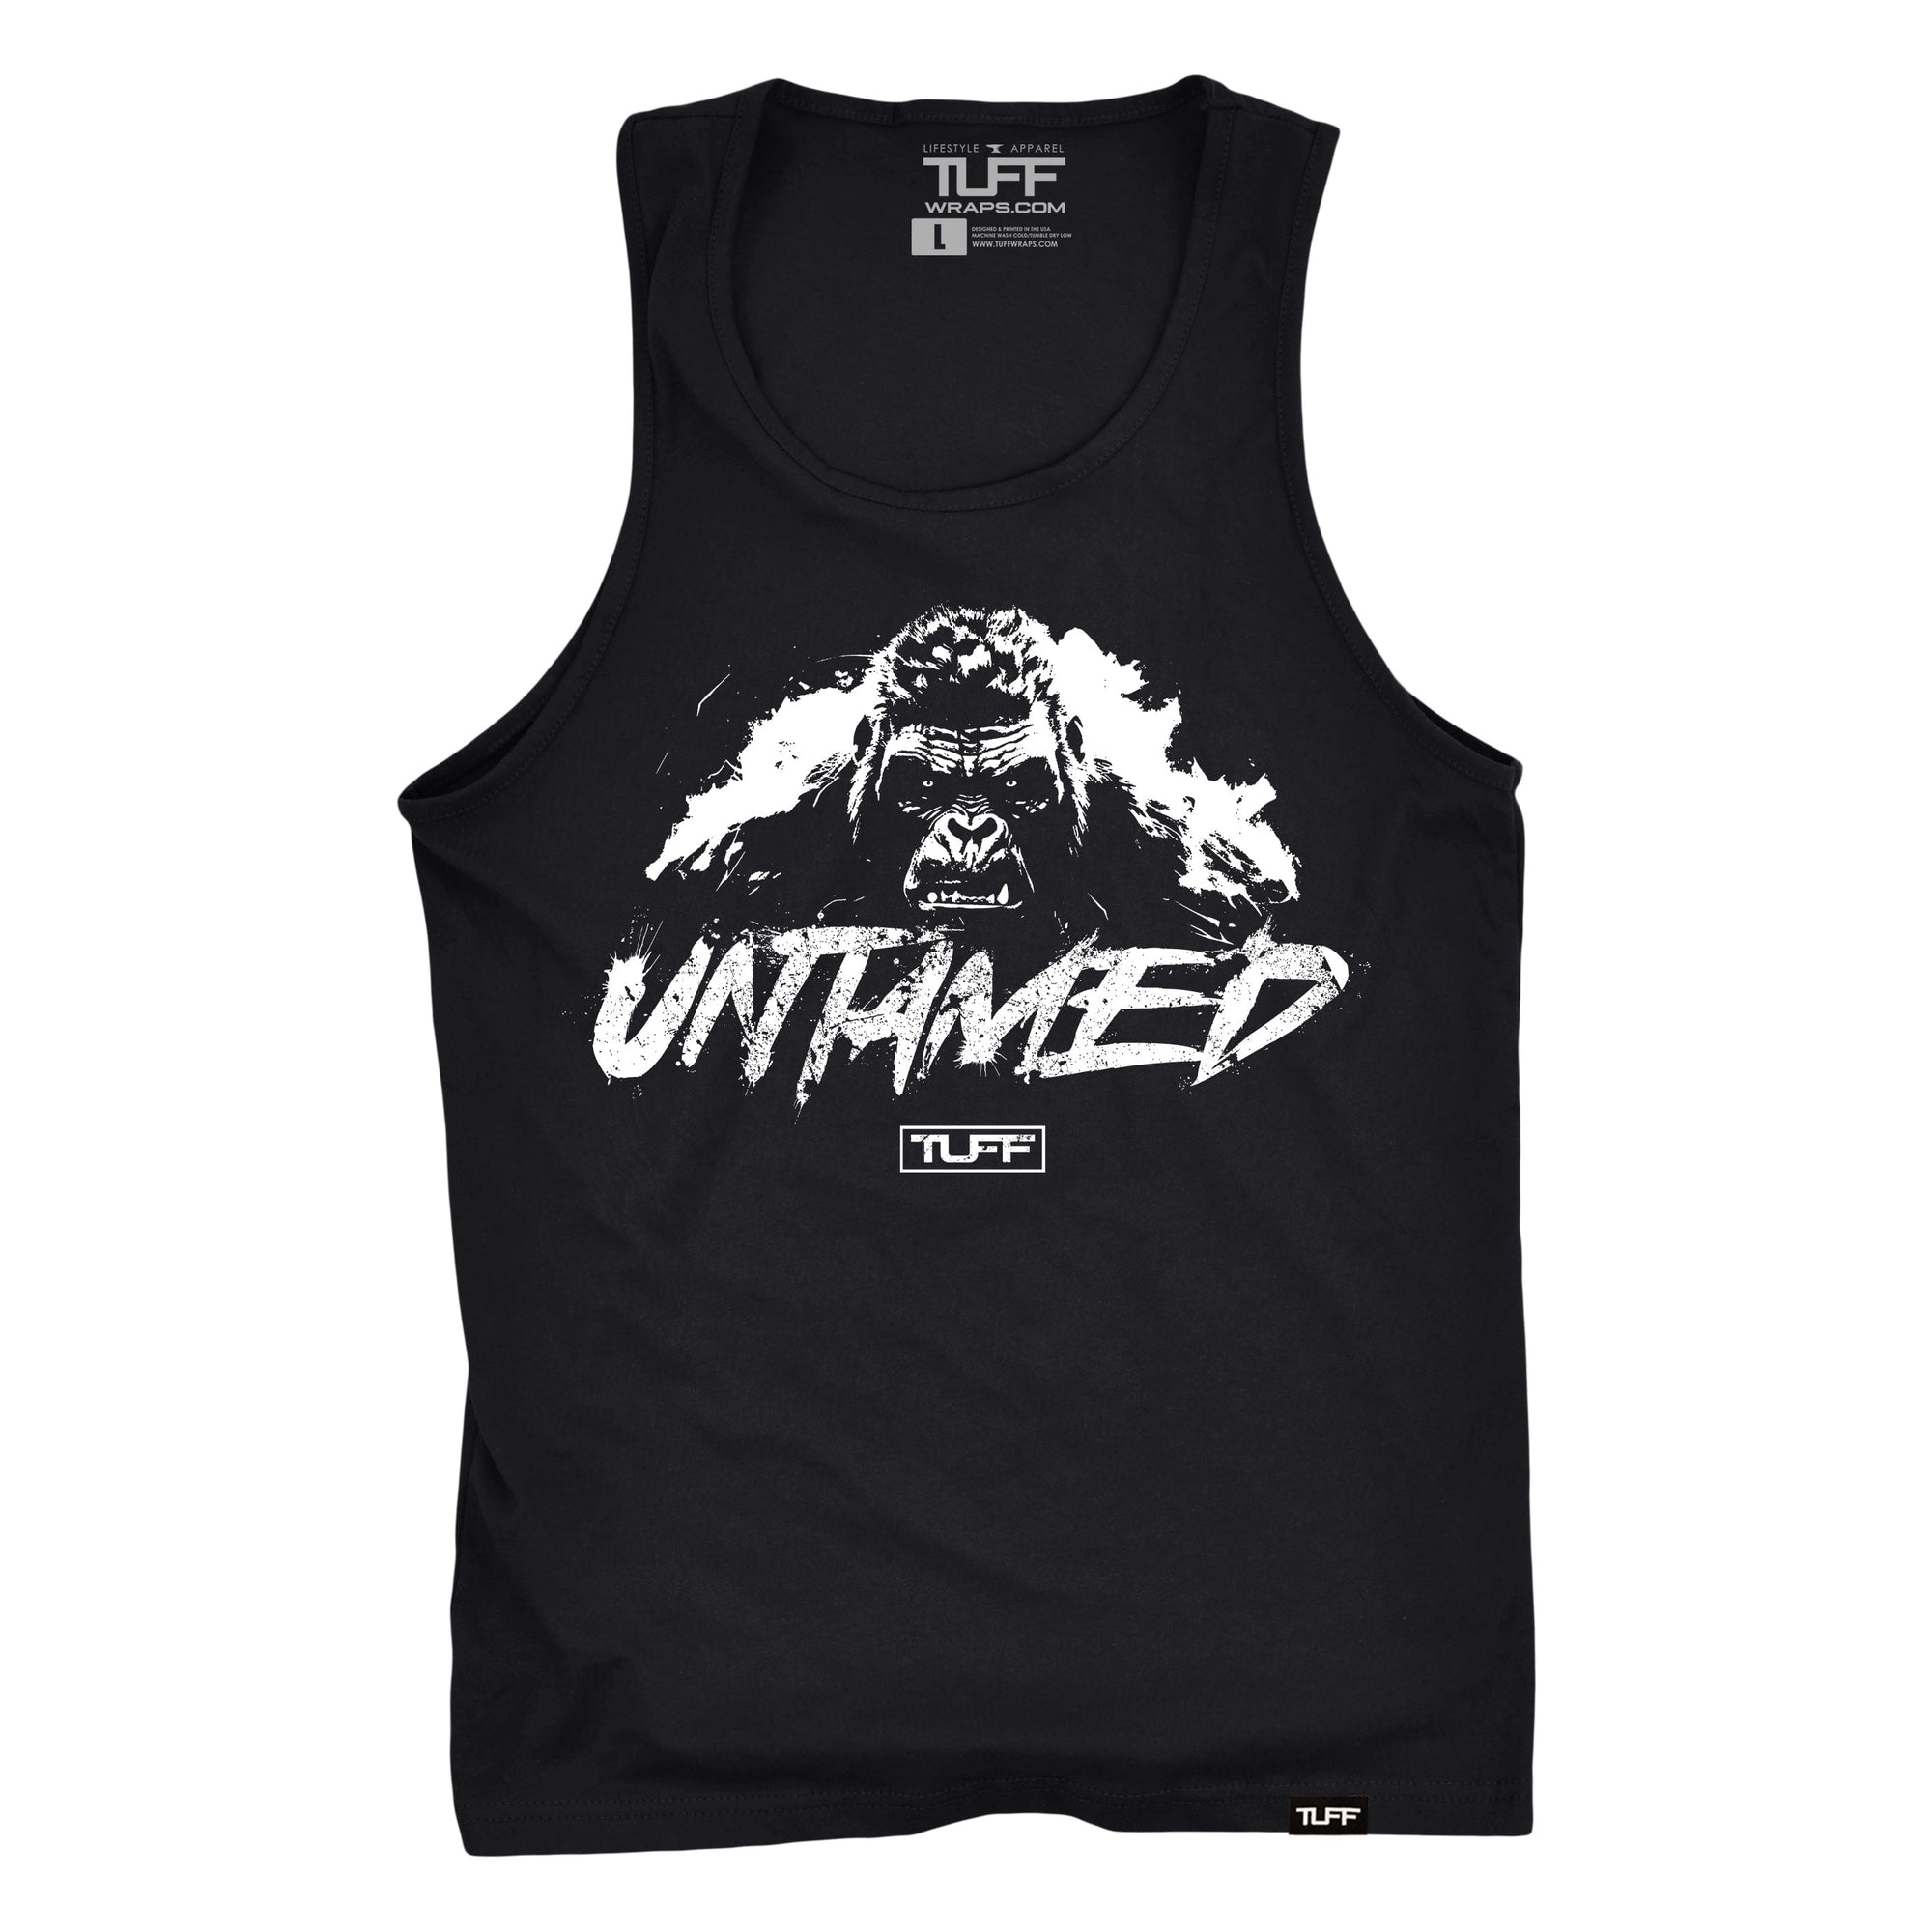 Show Your Strength: Men's Muscle & Tank Tops 